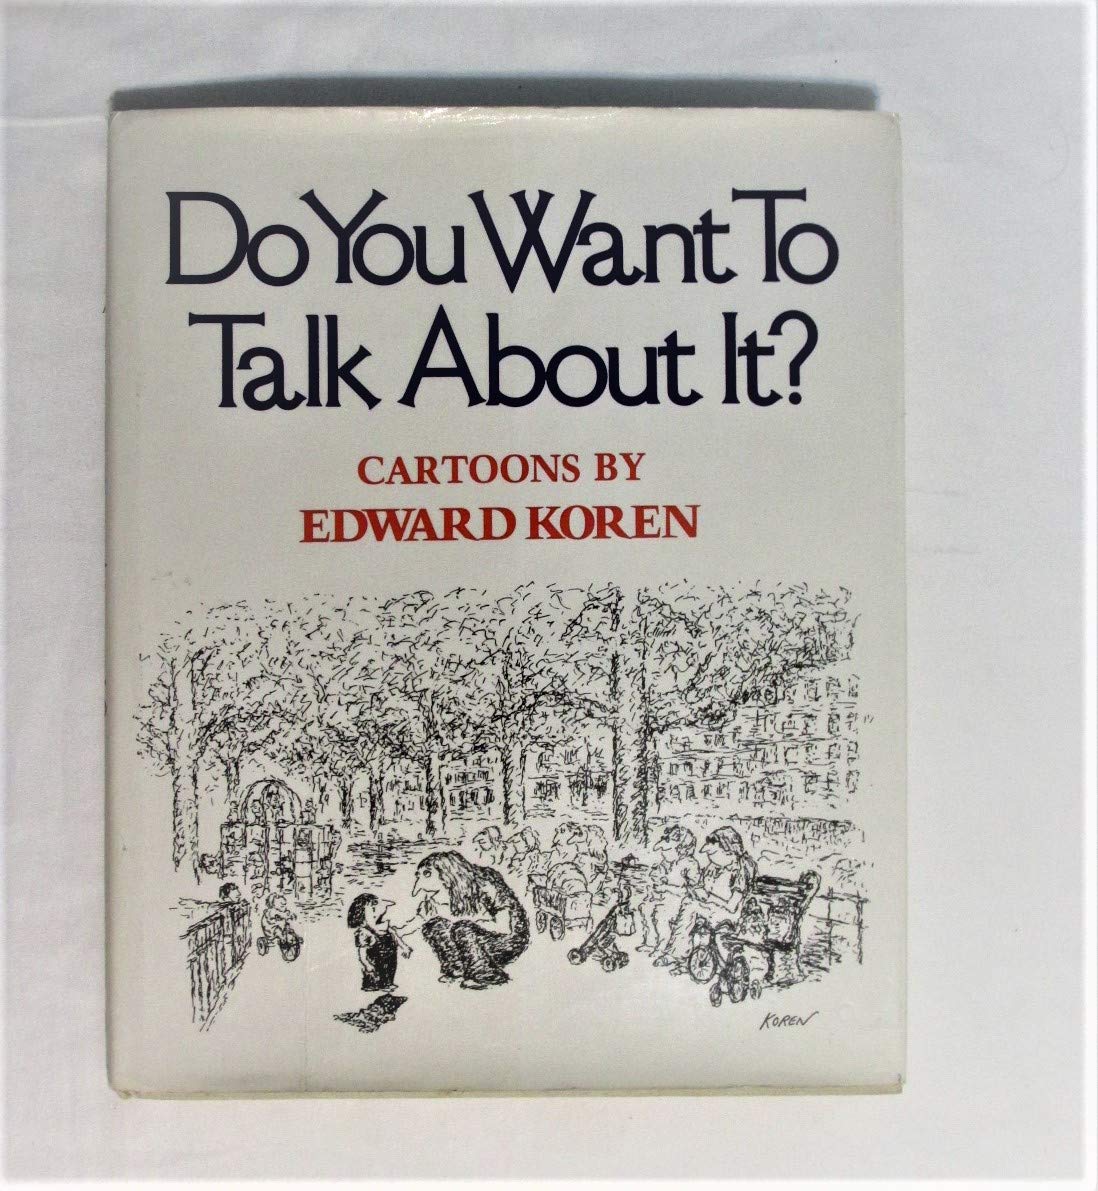 Do you want to talk about it? written by Calvin Trillin